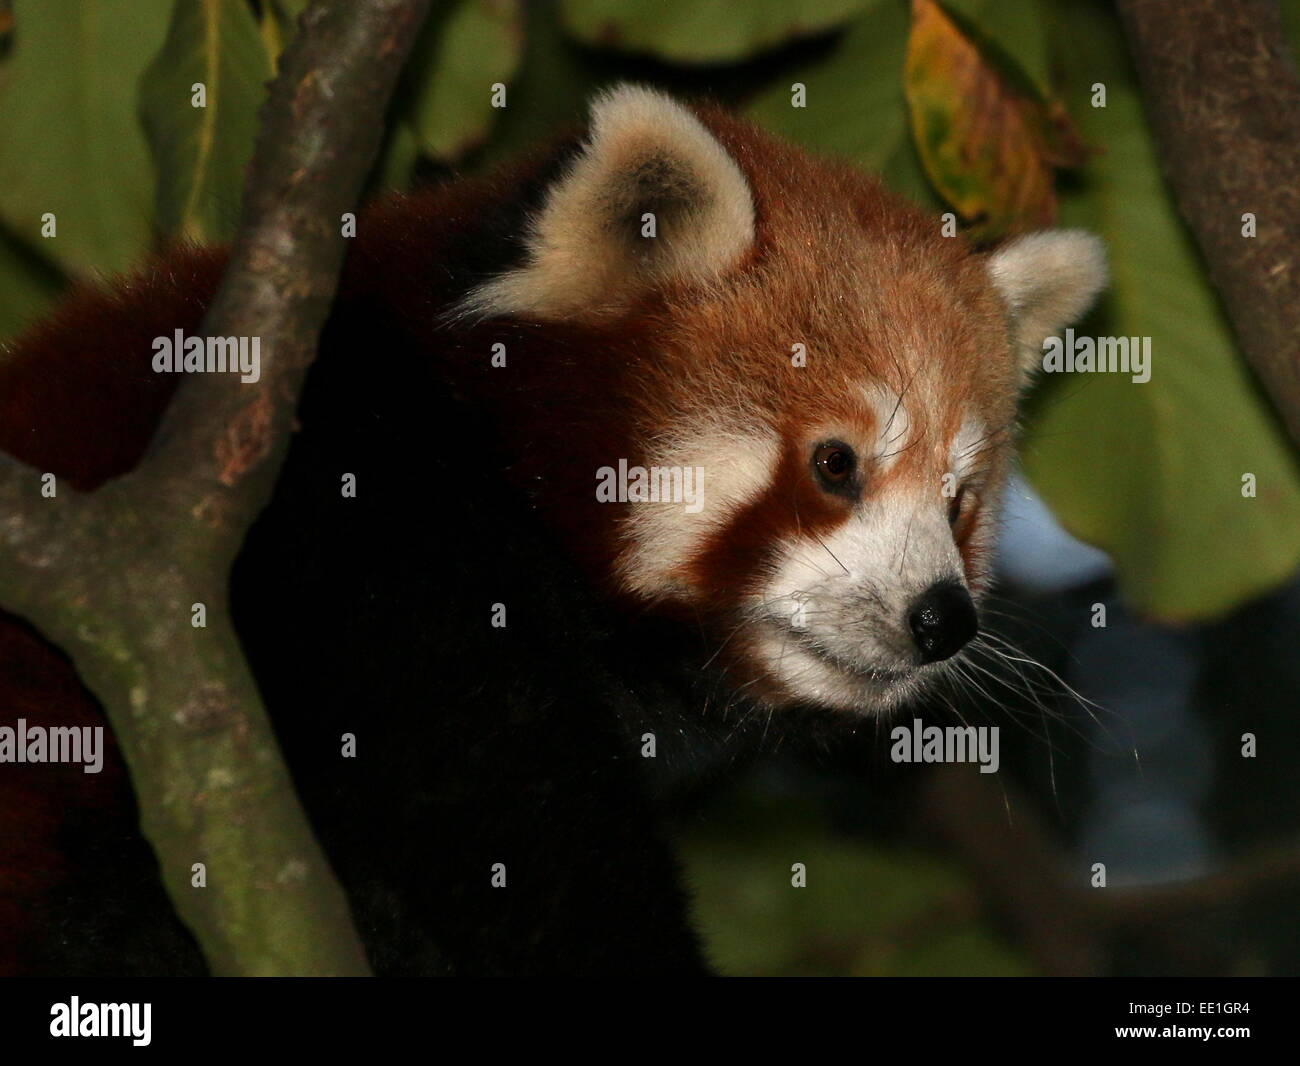 Close-up of an Asian Red Panda (Ailurus fulgens) in a tree at dusk. a.k.a. Lesser panda or red cat-bear. Stock Photo